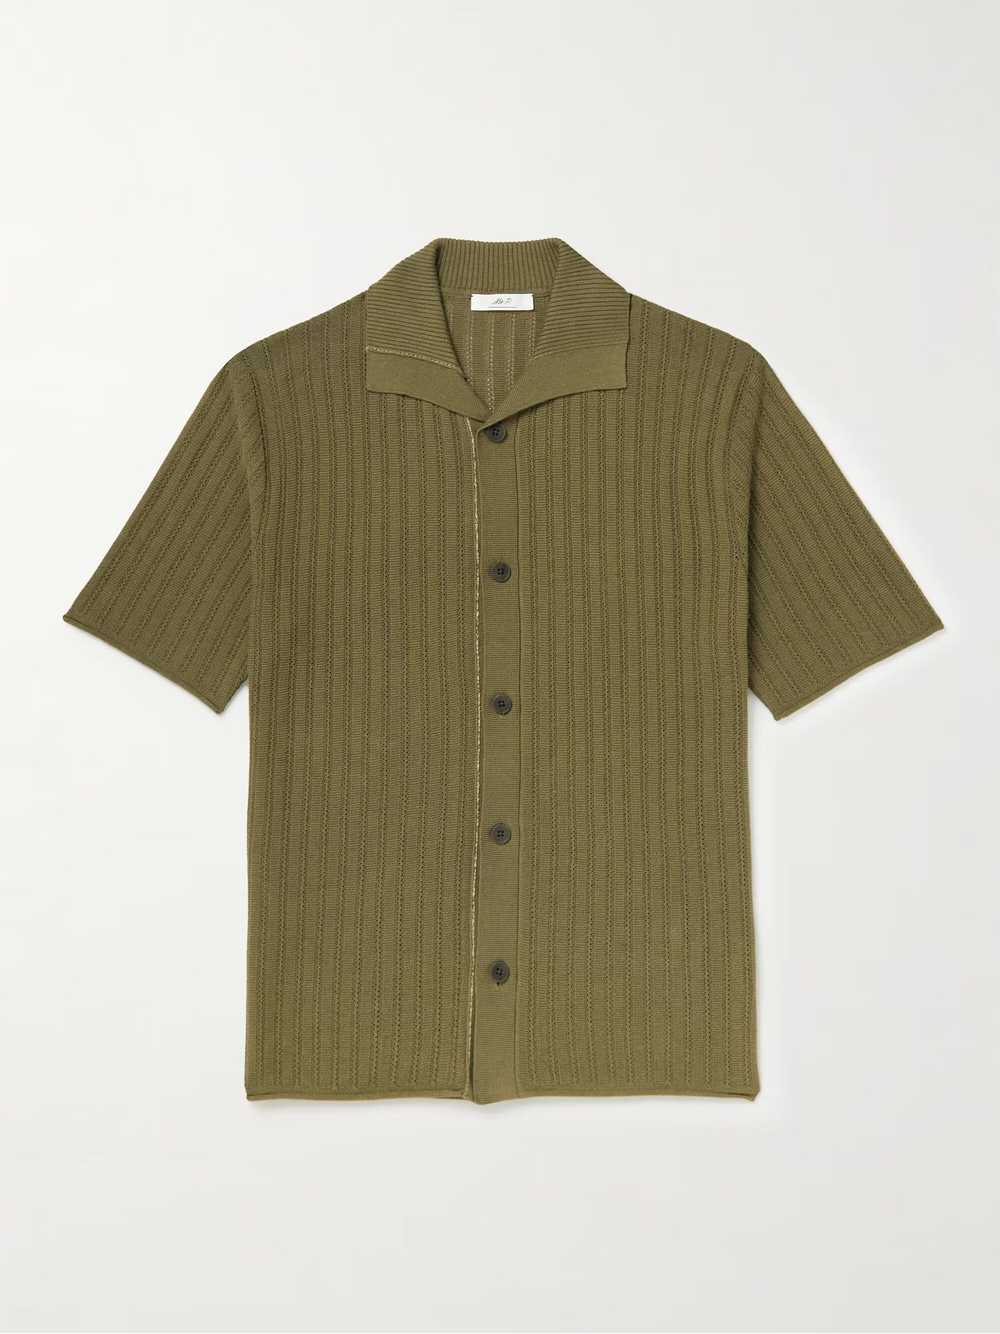 Mr. P. Open-Knit Cotton and Lyocell-Blend Shirt - image 1